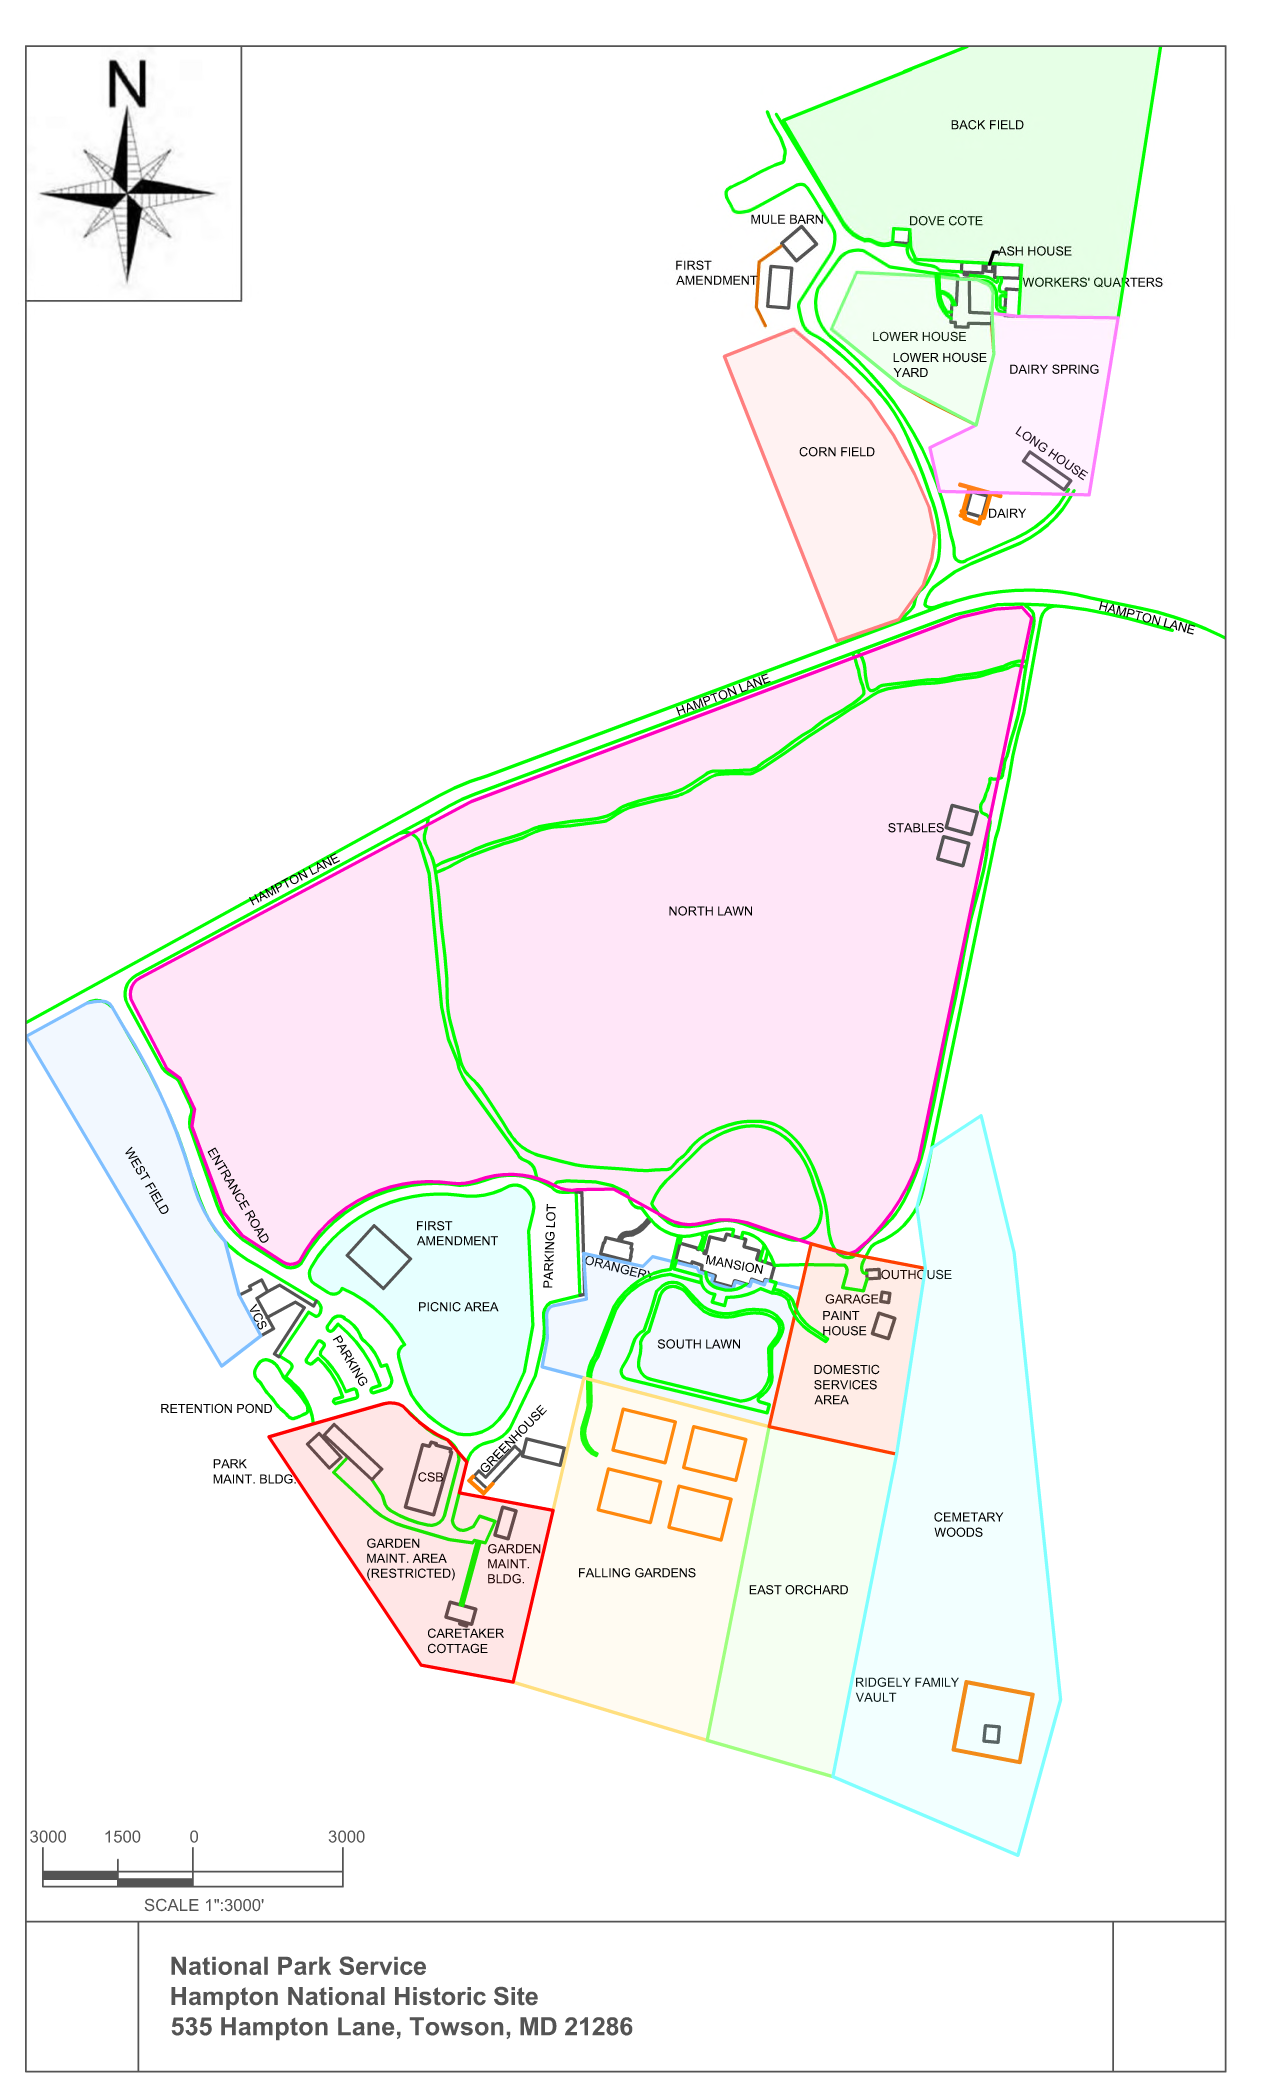 A color coded map showing areas of the park where various activities are and are not allowed.